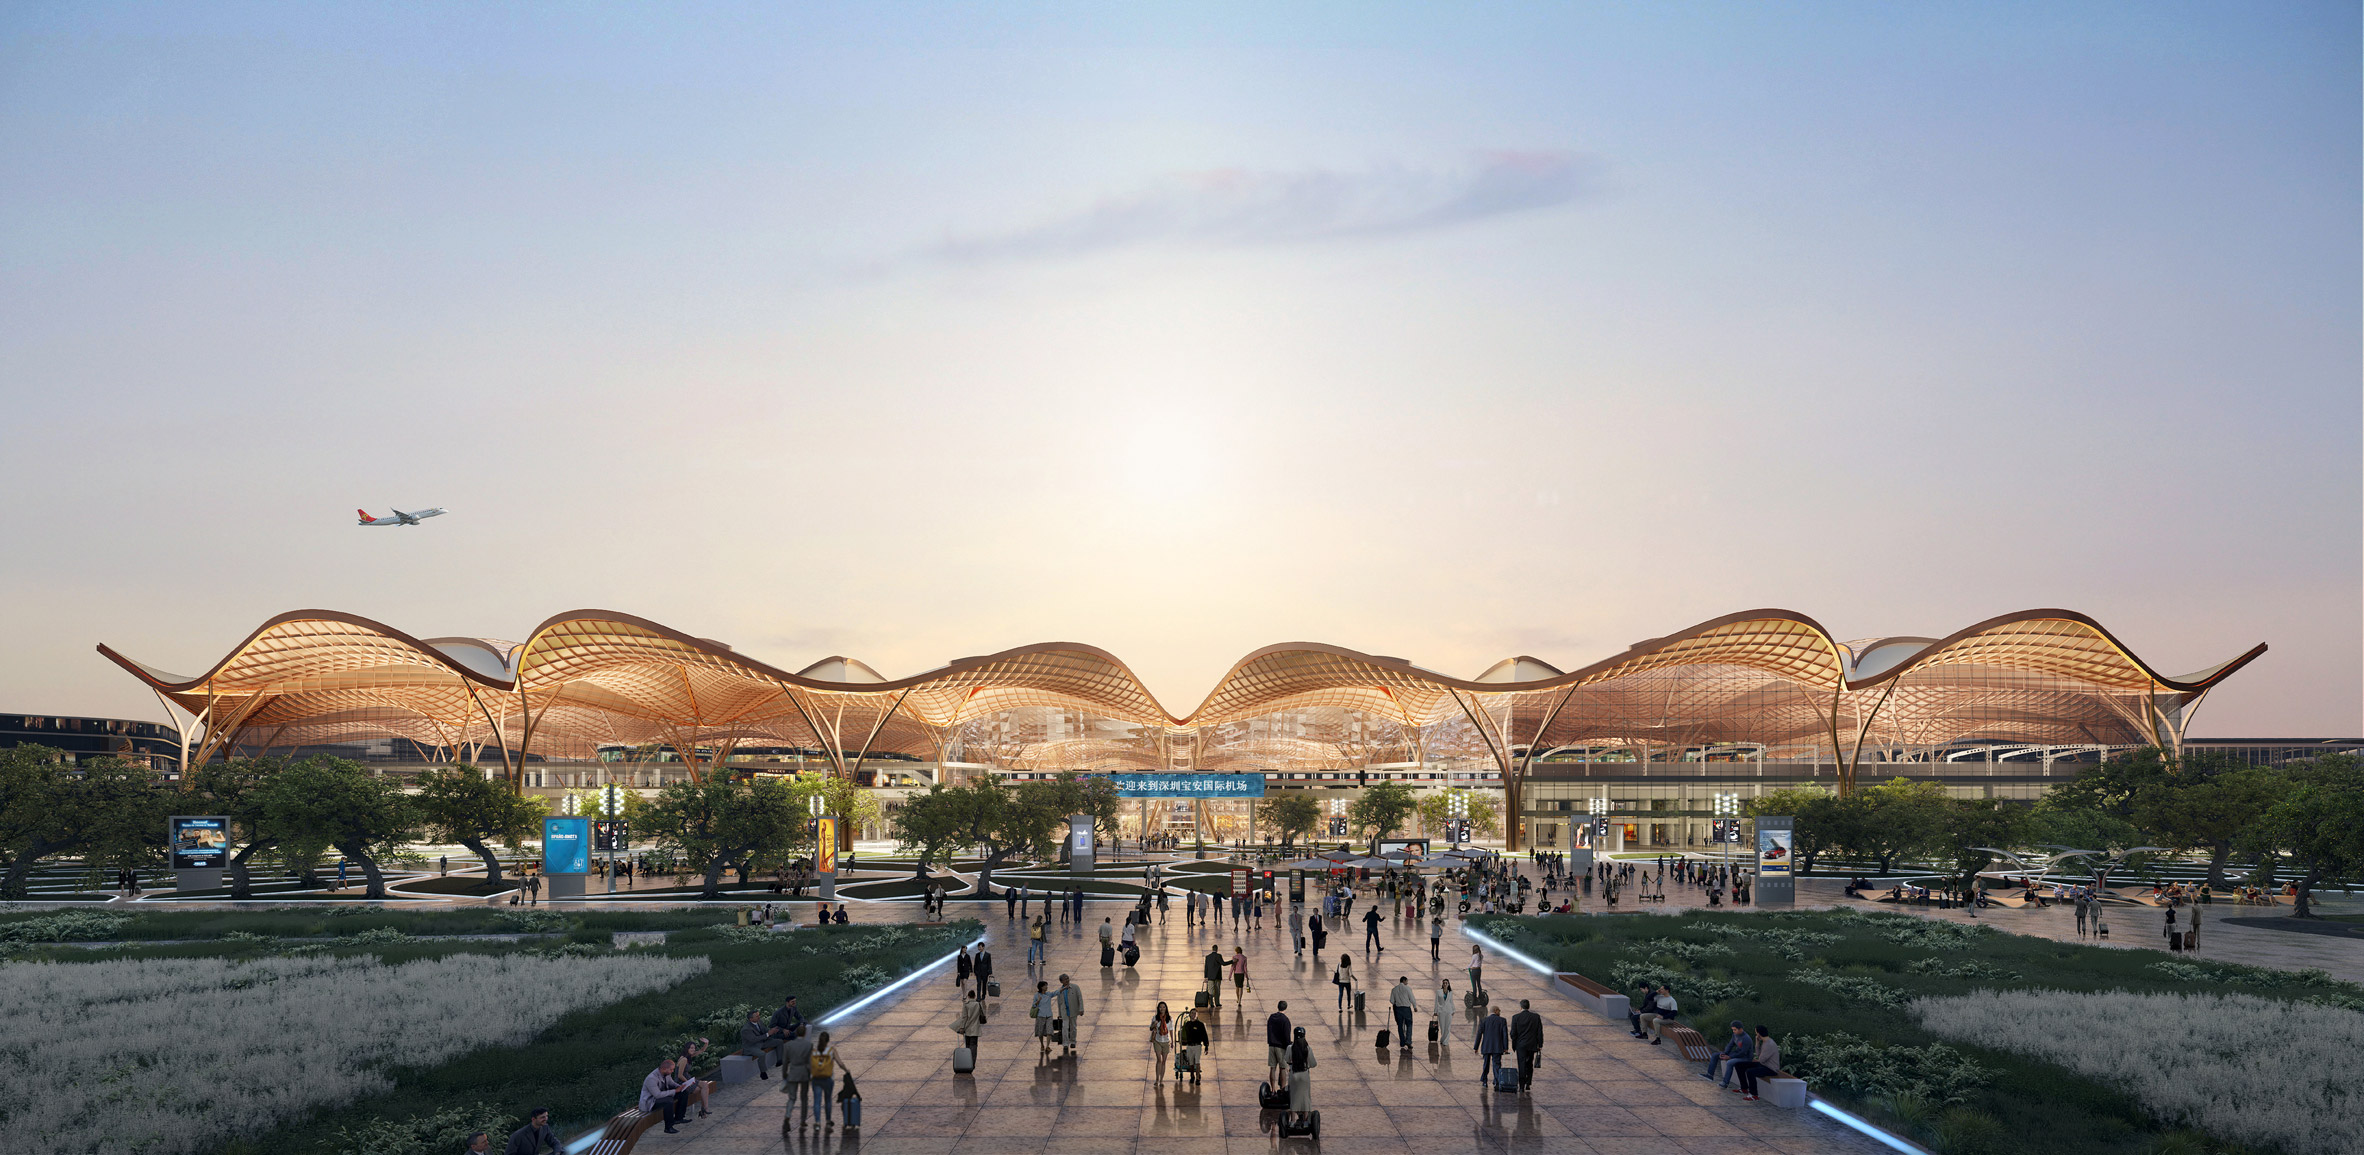 A visual of a new transport hub in Shenzhen